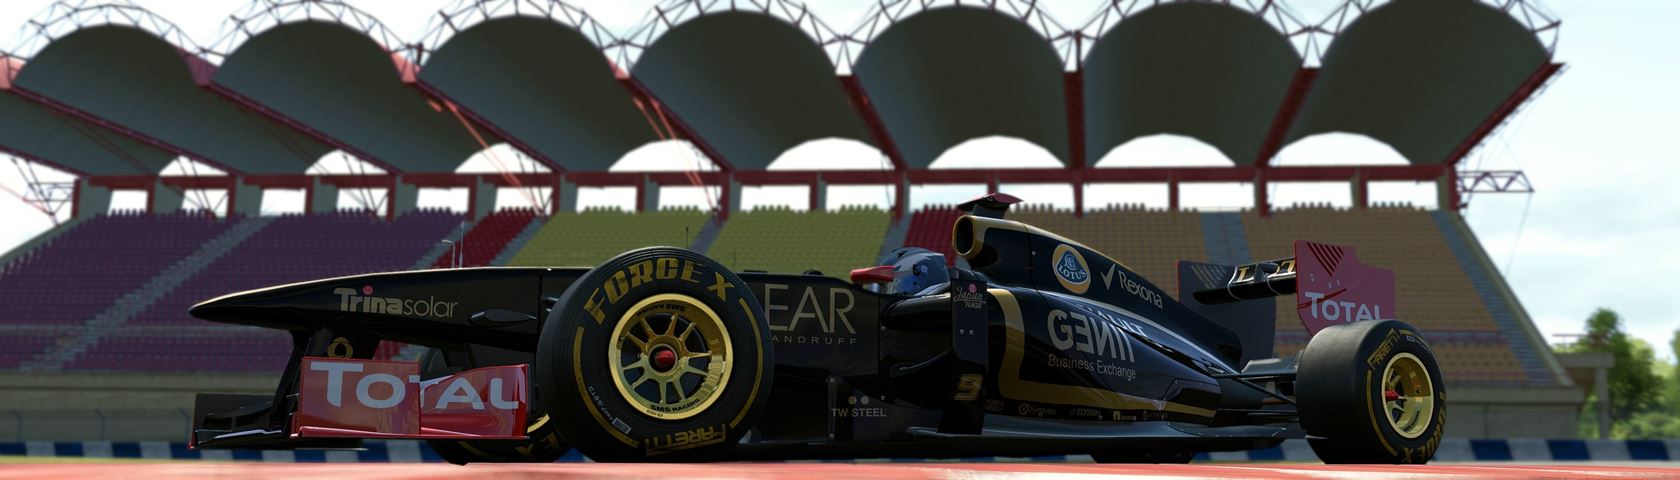 2013 Lotus F1 Car in Project CARS